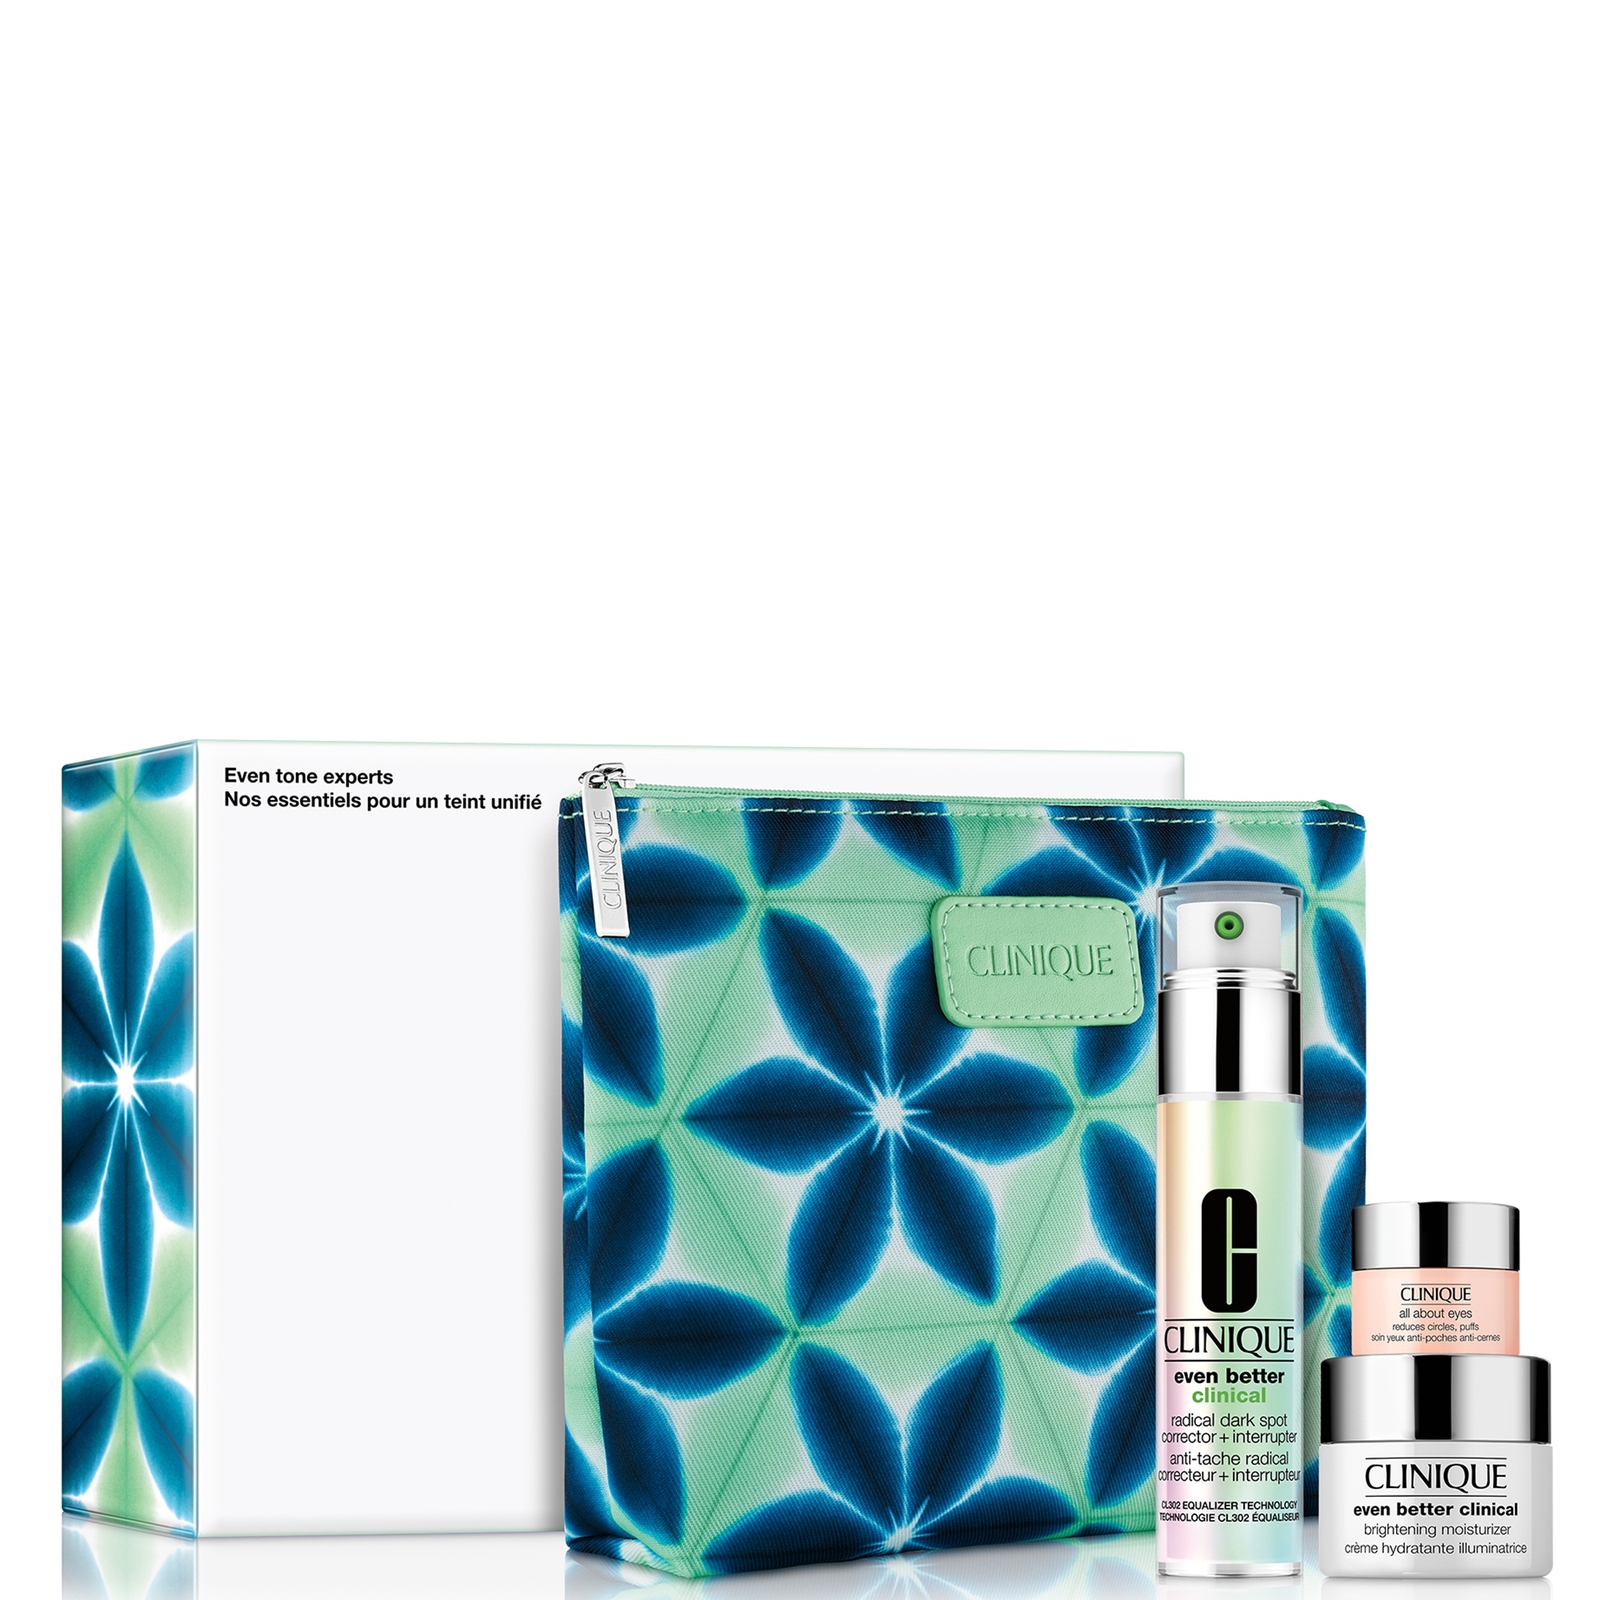 Clinique Even Tone Experts: Brightening Skincare Gift Set In White